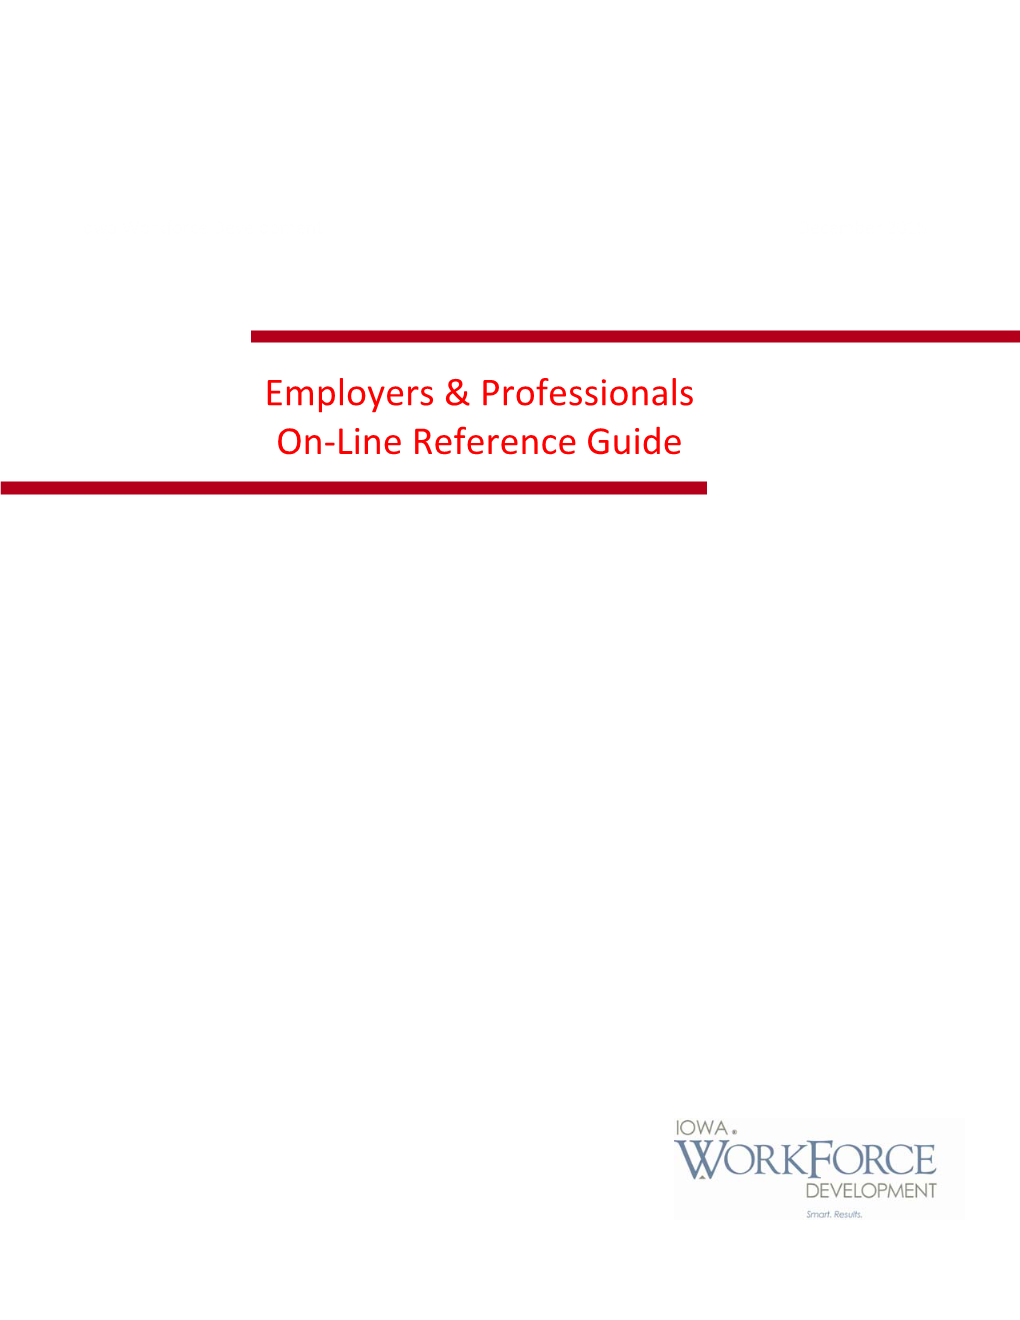 2019 Employers & Professionals On-Line Reference Guide